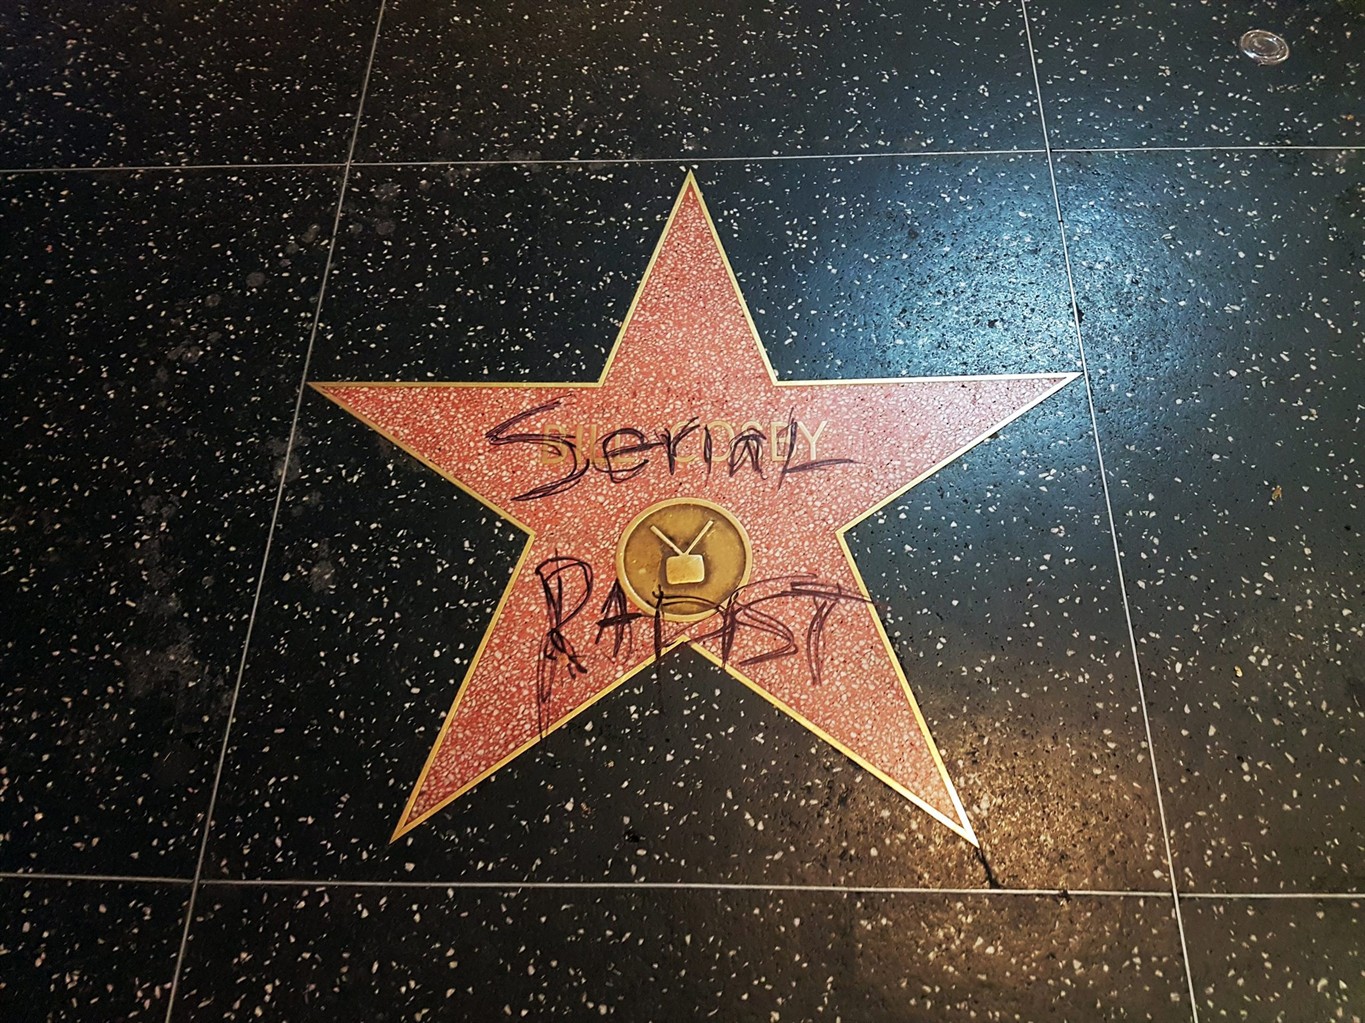 Cosbys Hollywood Walk Of Fame Star Vandalized With Graffiti